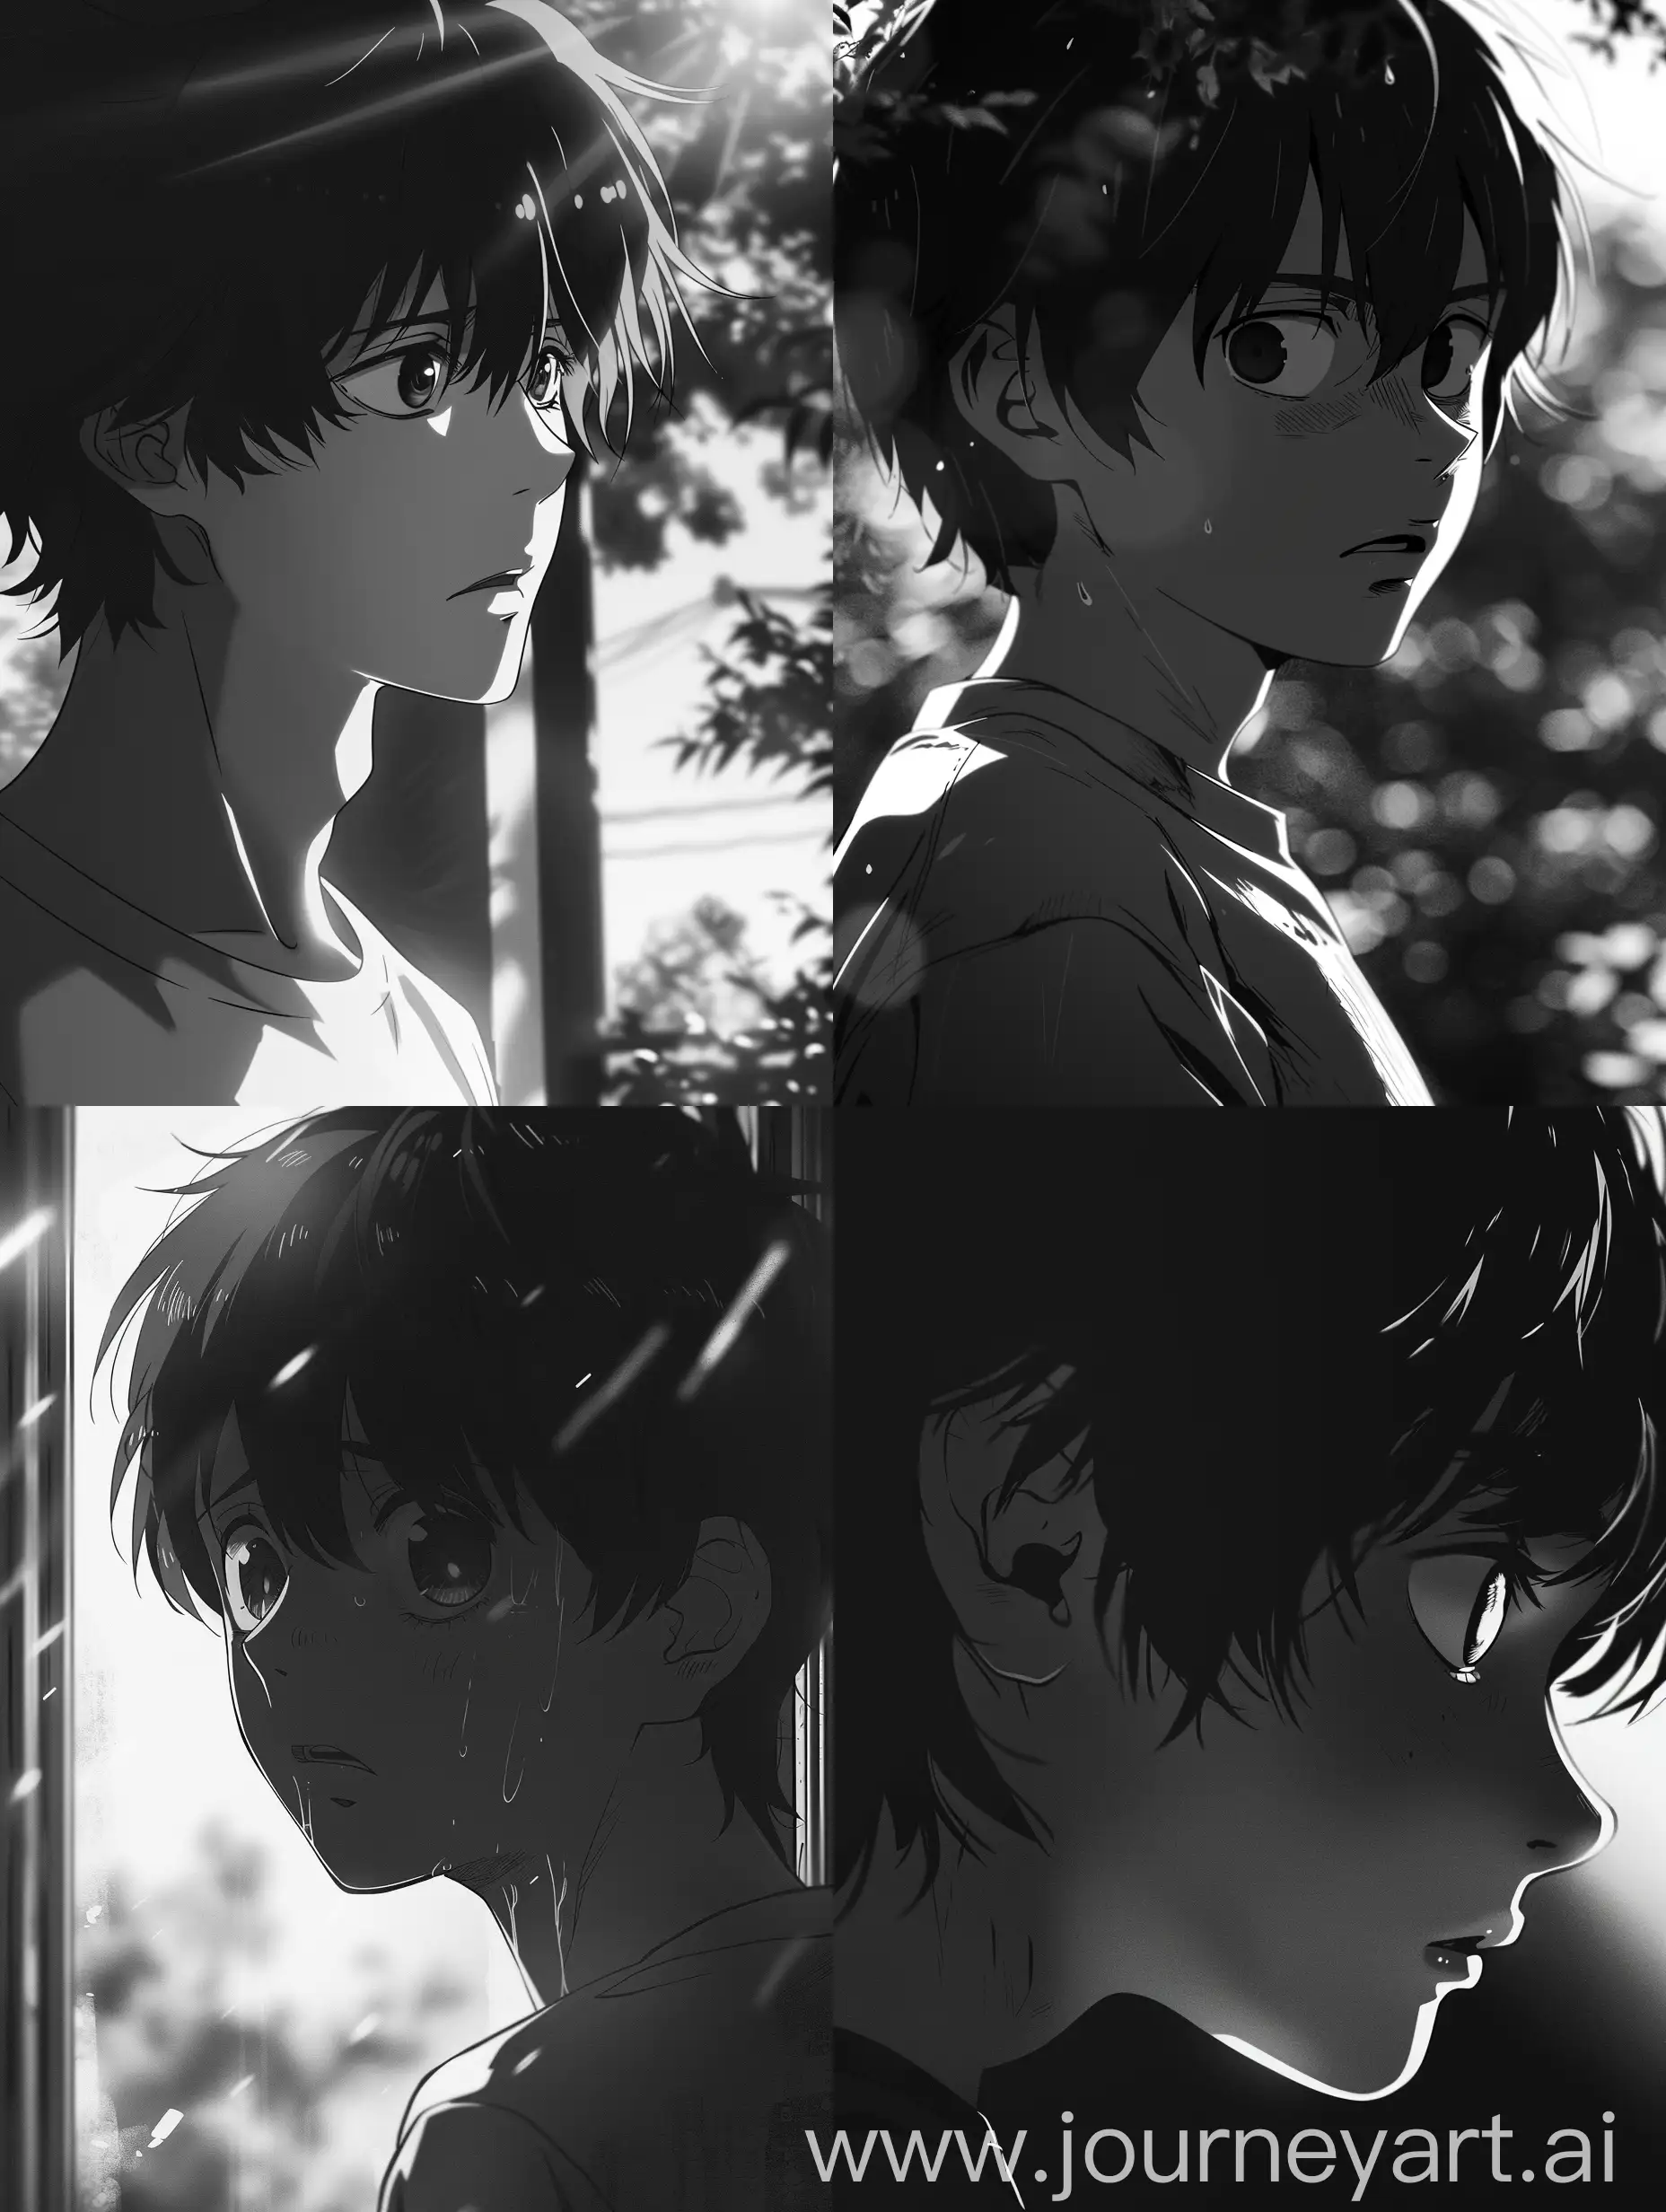 A shot of the 18 year old boy character gazing into the distance, their eyes filled with resolve and determination, hinting at their determination to make their life count.black and white,dramatic,anime style.